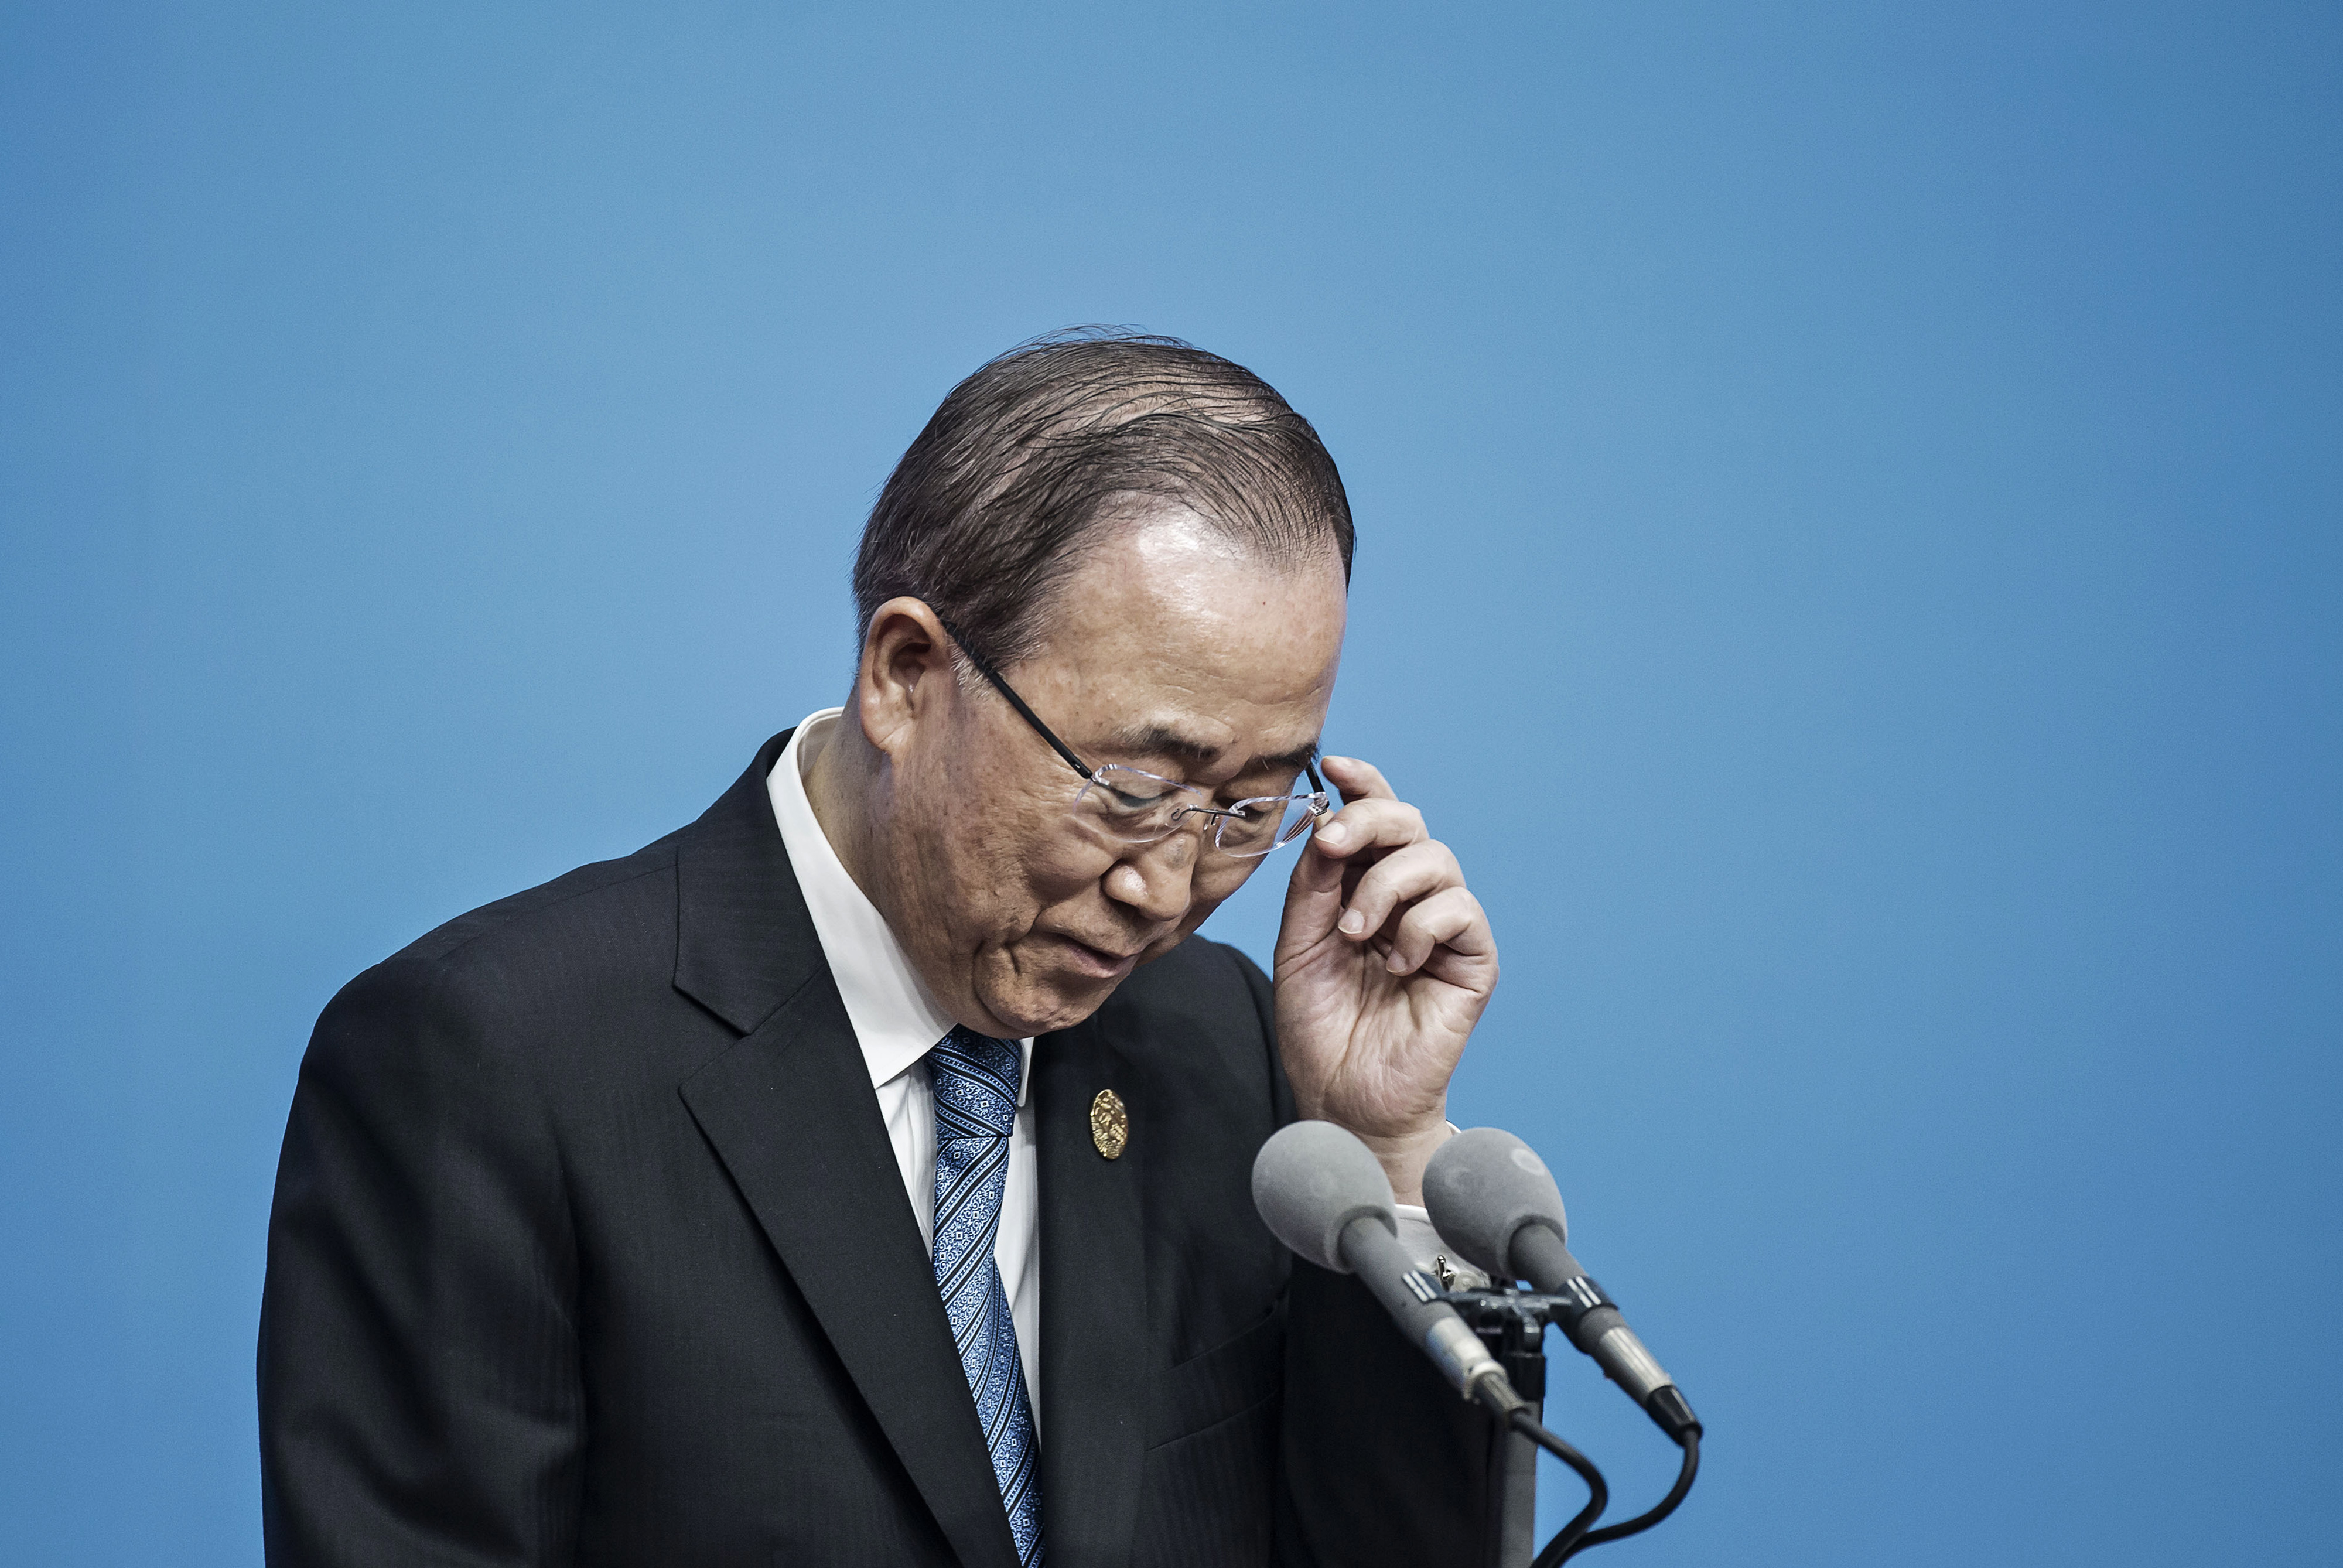 Ban Ki-Moon, then secretary general of the United Nations, adjusts his glasses during a news conference on the sidelines of the Group of 20 (G-20) summit in Hangzhou, China, on Sunday, Sept. 4, 2016. (Qilai Shen/Bloomberg via Getty Images)